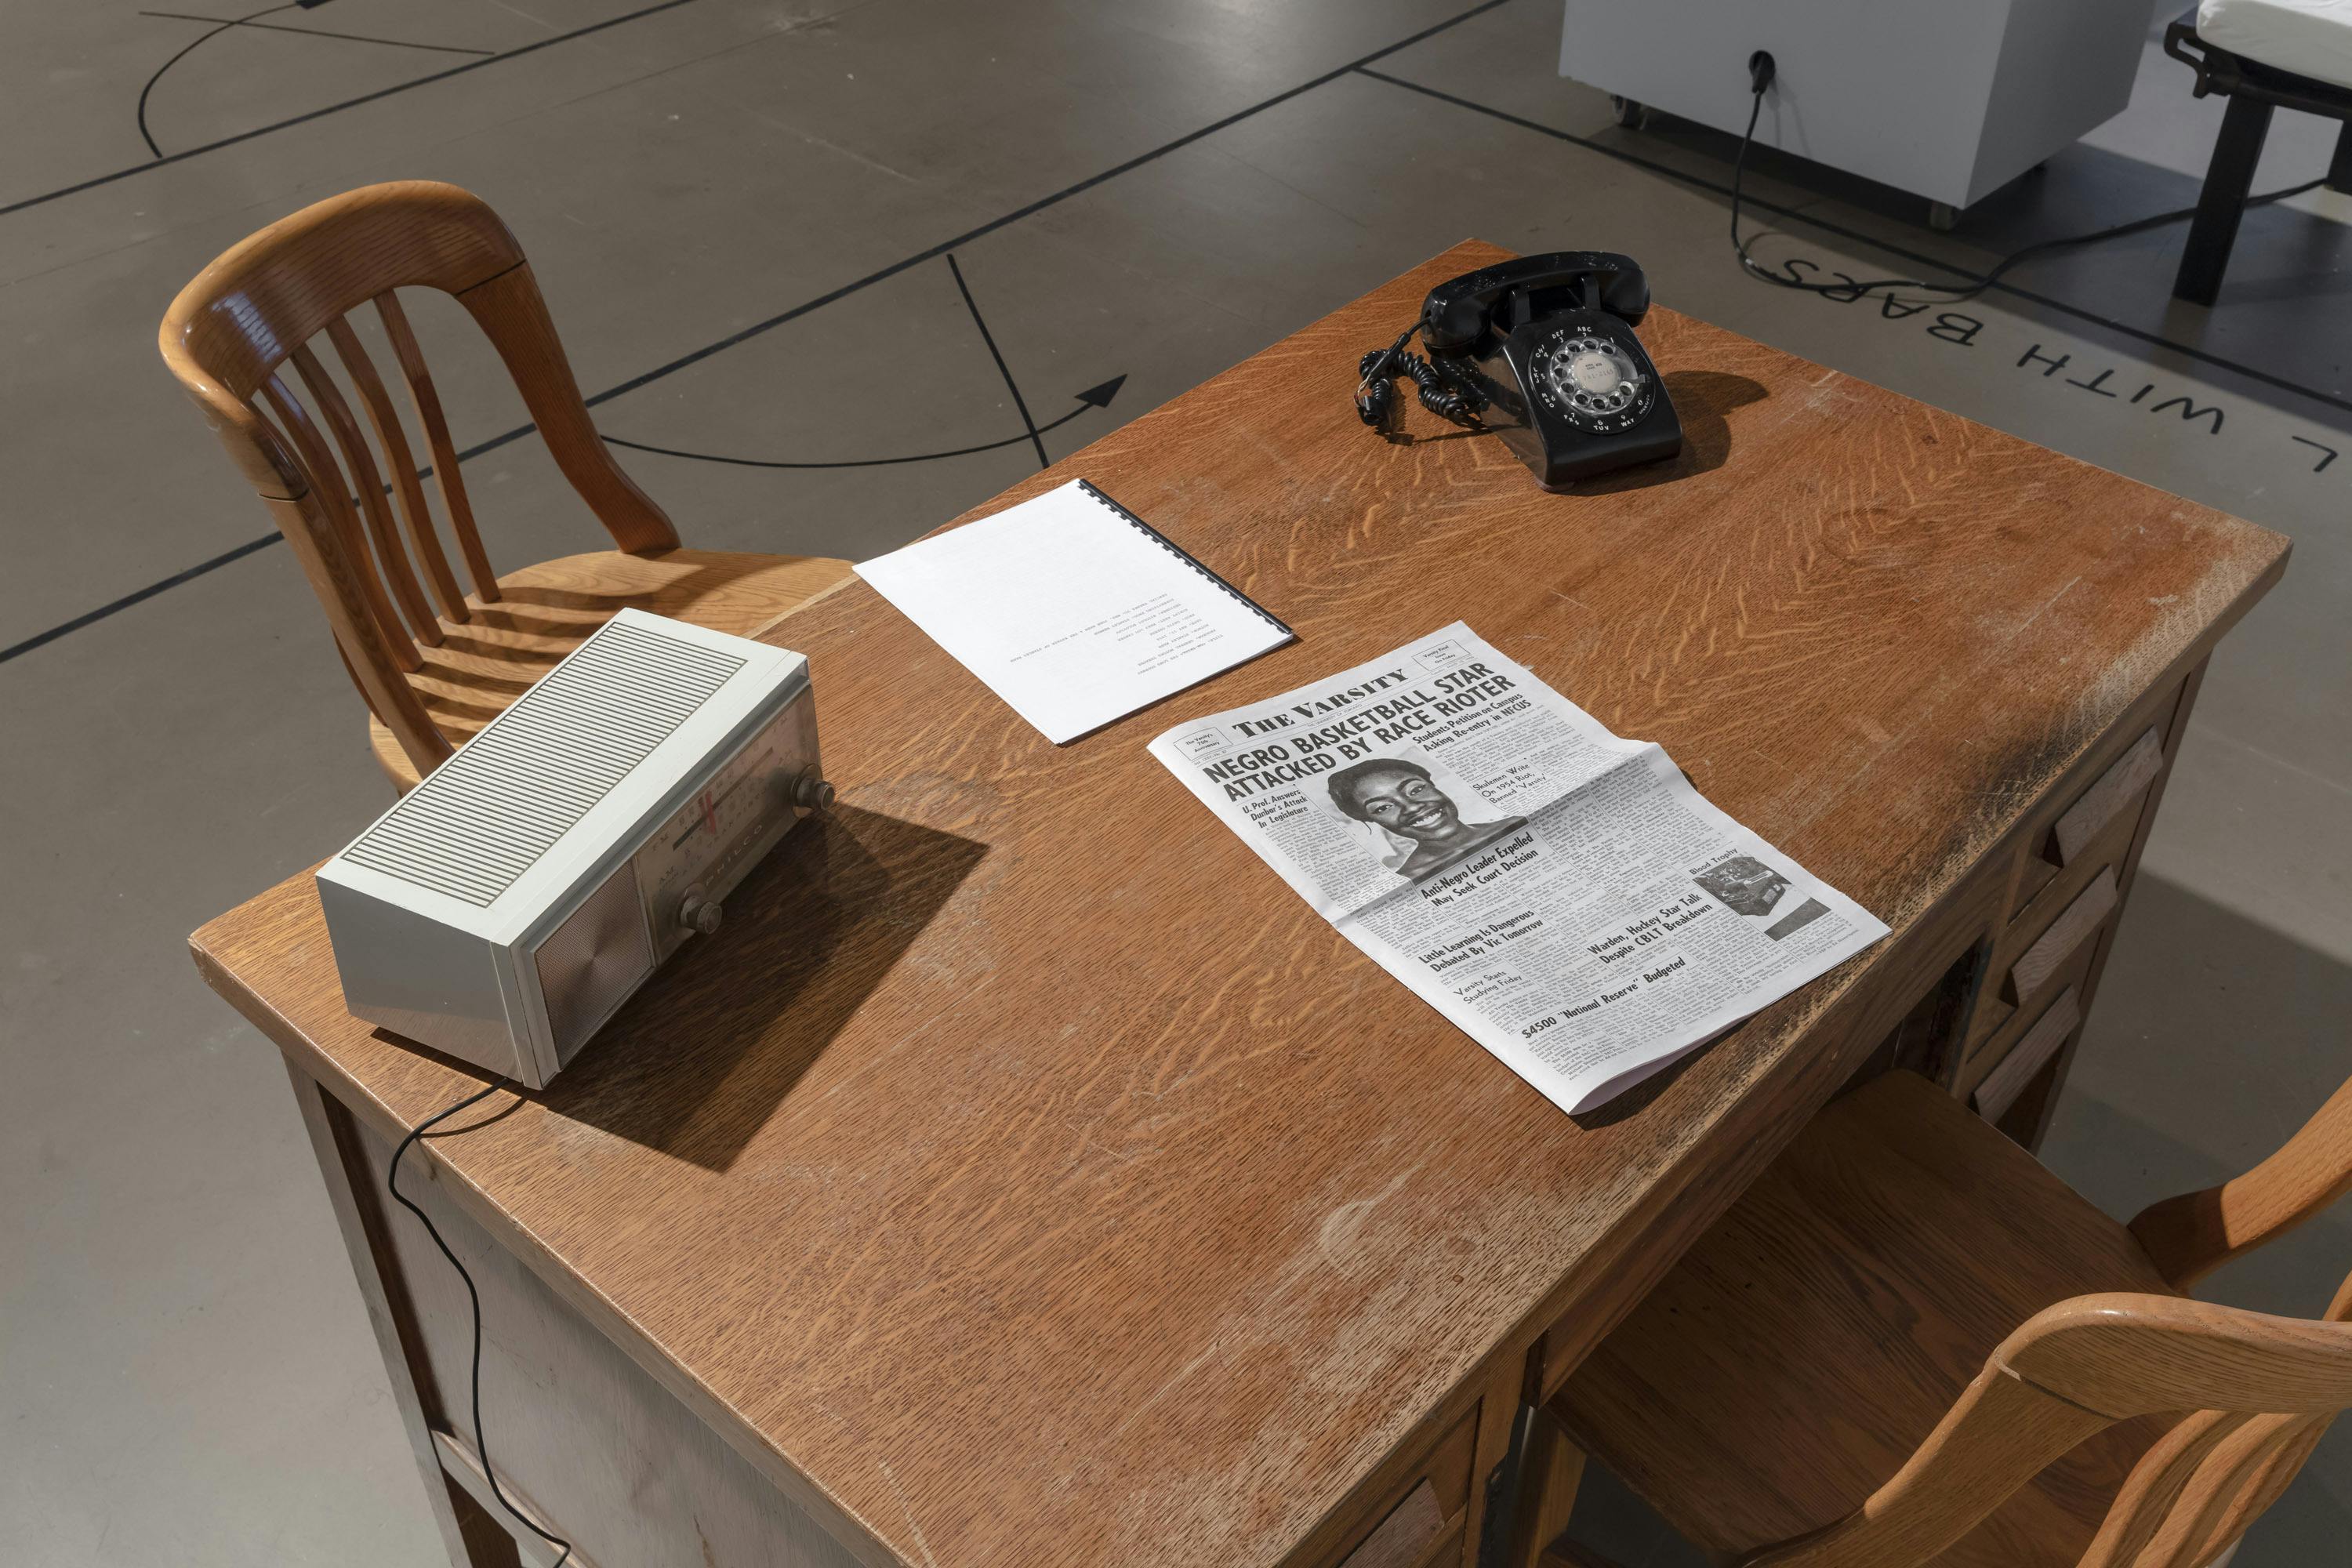 A detail of installation work by Deanna Bowen. On a table with two chairs, a rotary phone, a radio, newspaper, and a note are placed. 